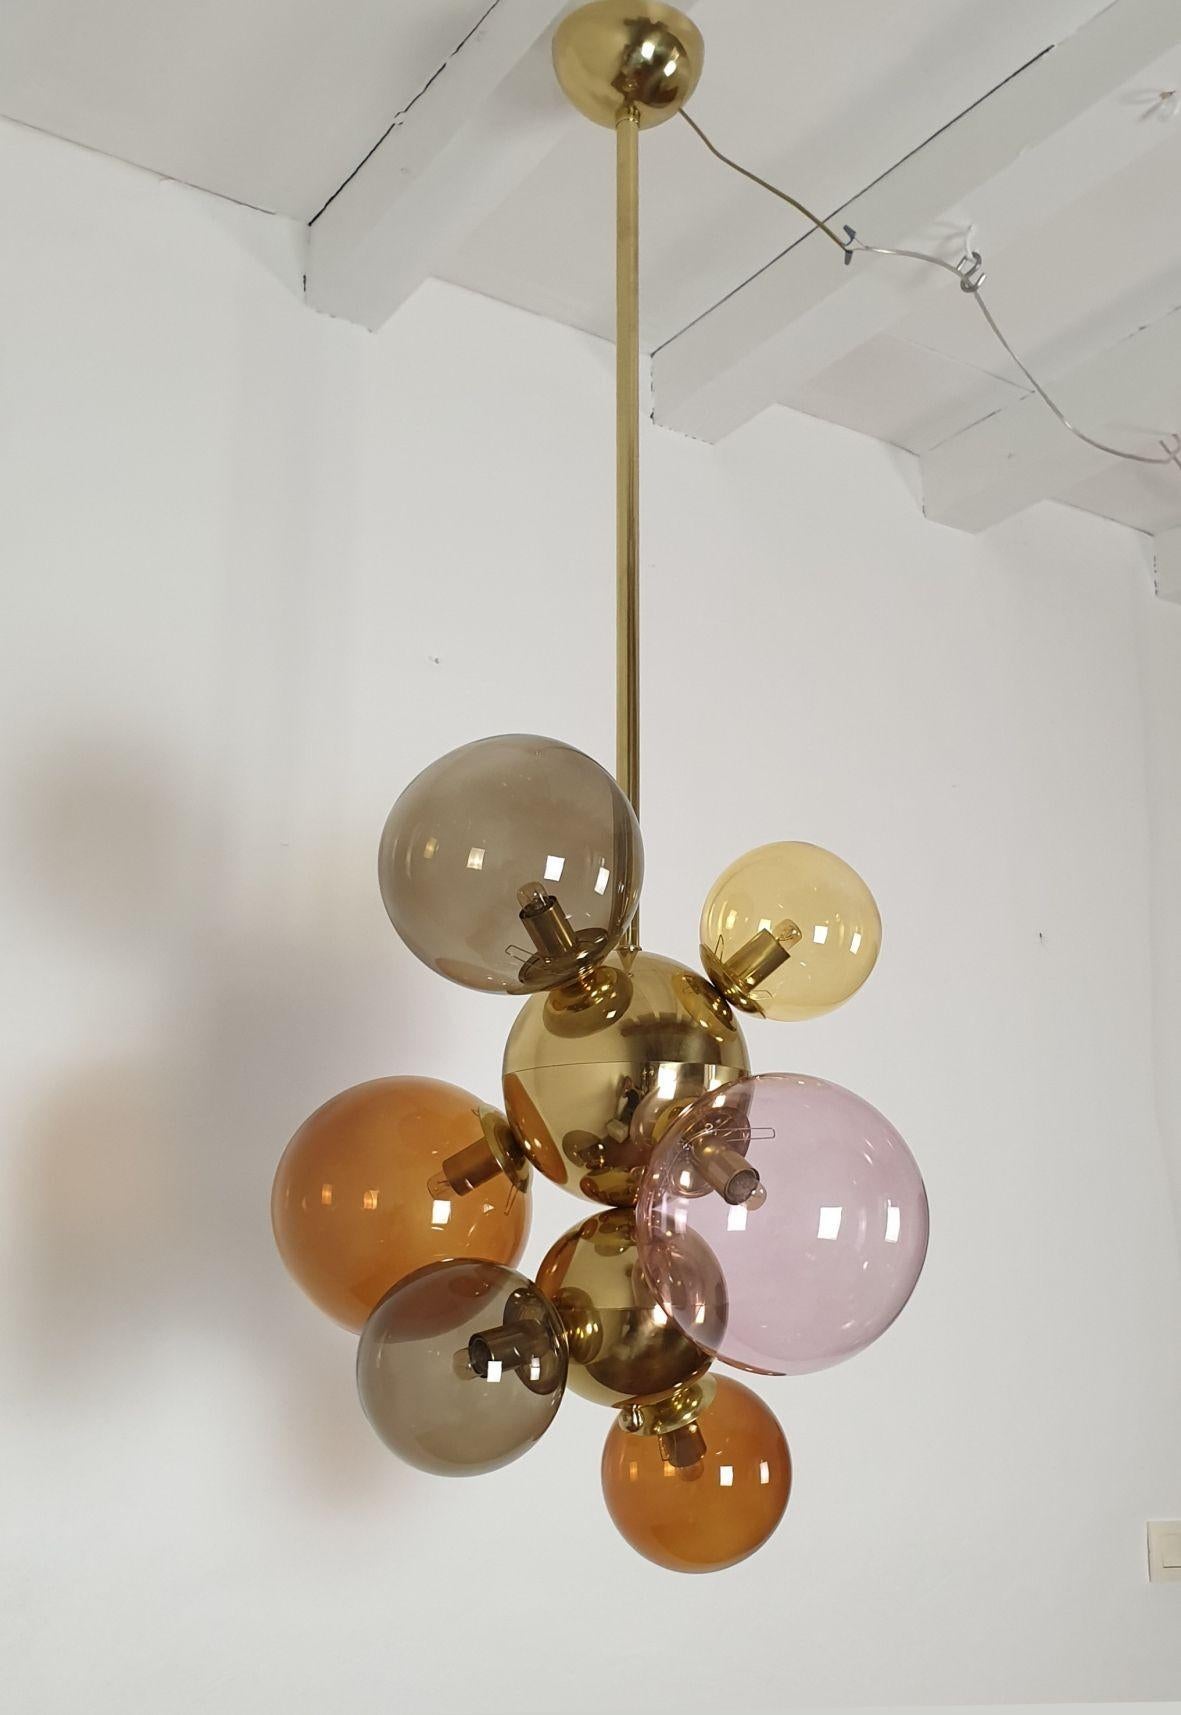 Tall Mid Century Modern glass balls and brass chandelier or pendant light, Italy circa 2000s.
The chandelier is made of different sizes glass balls and polished brass balls and stem.
The glass balls are in different pastel colors: lilac, amber, dark